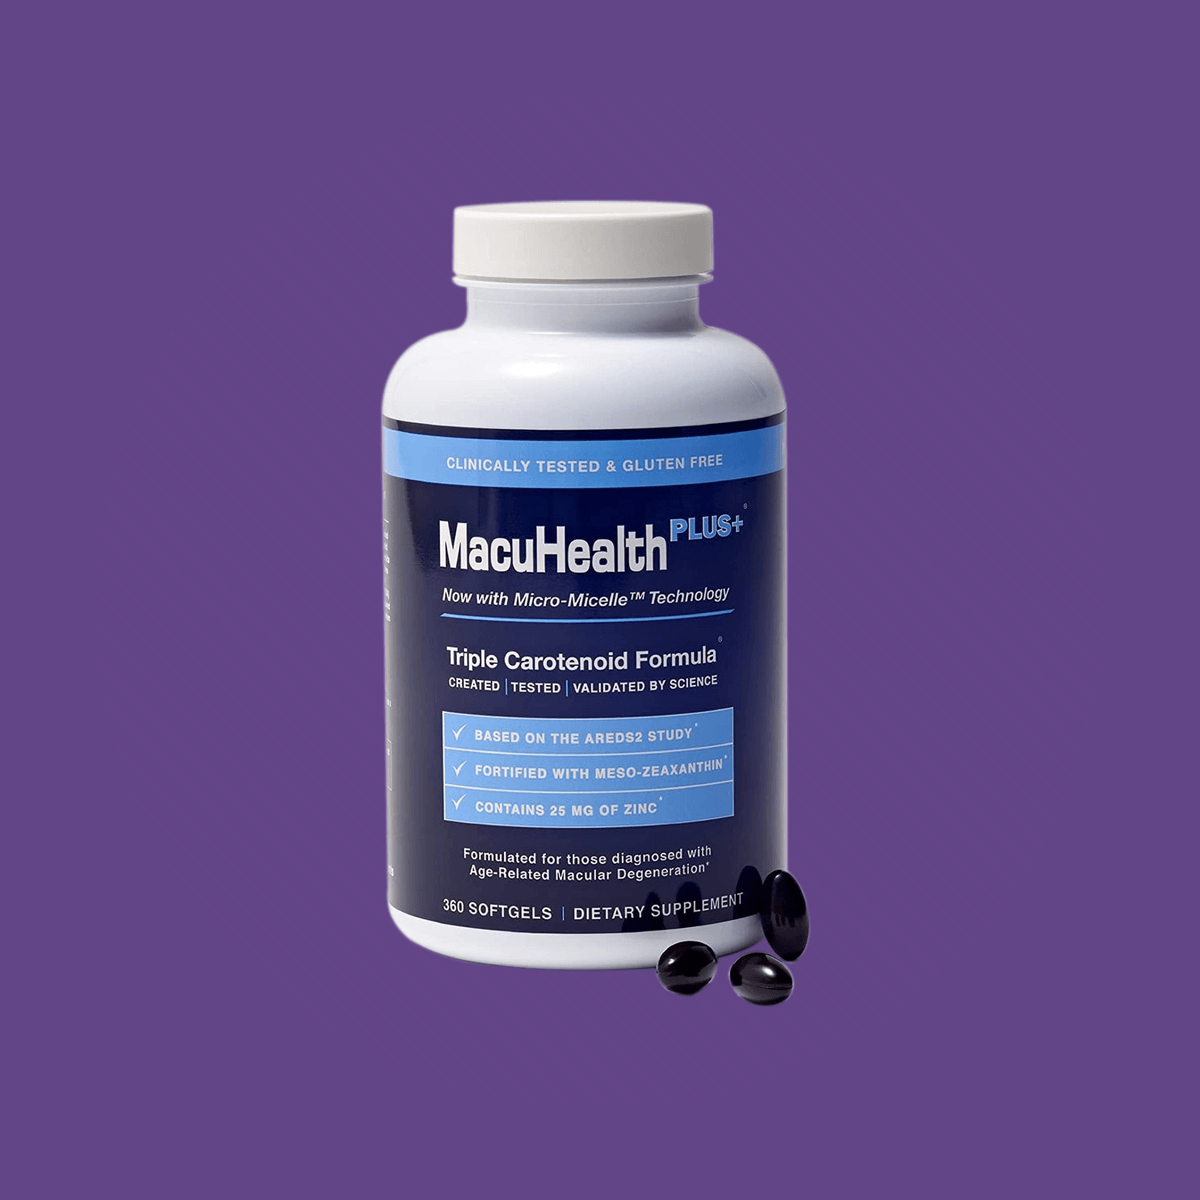 MacuHealth Plus+ Eye Supplement for Adults - Meso-Zeaxanthin, Lutein & Zeaxanthin, (90 Days Supply) - DryEye Rescue Store